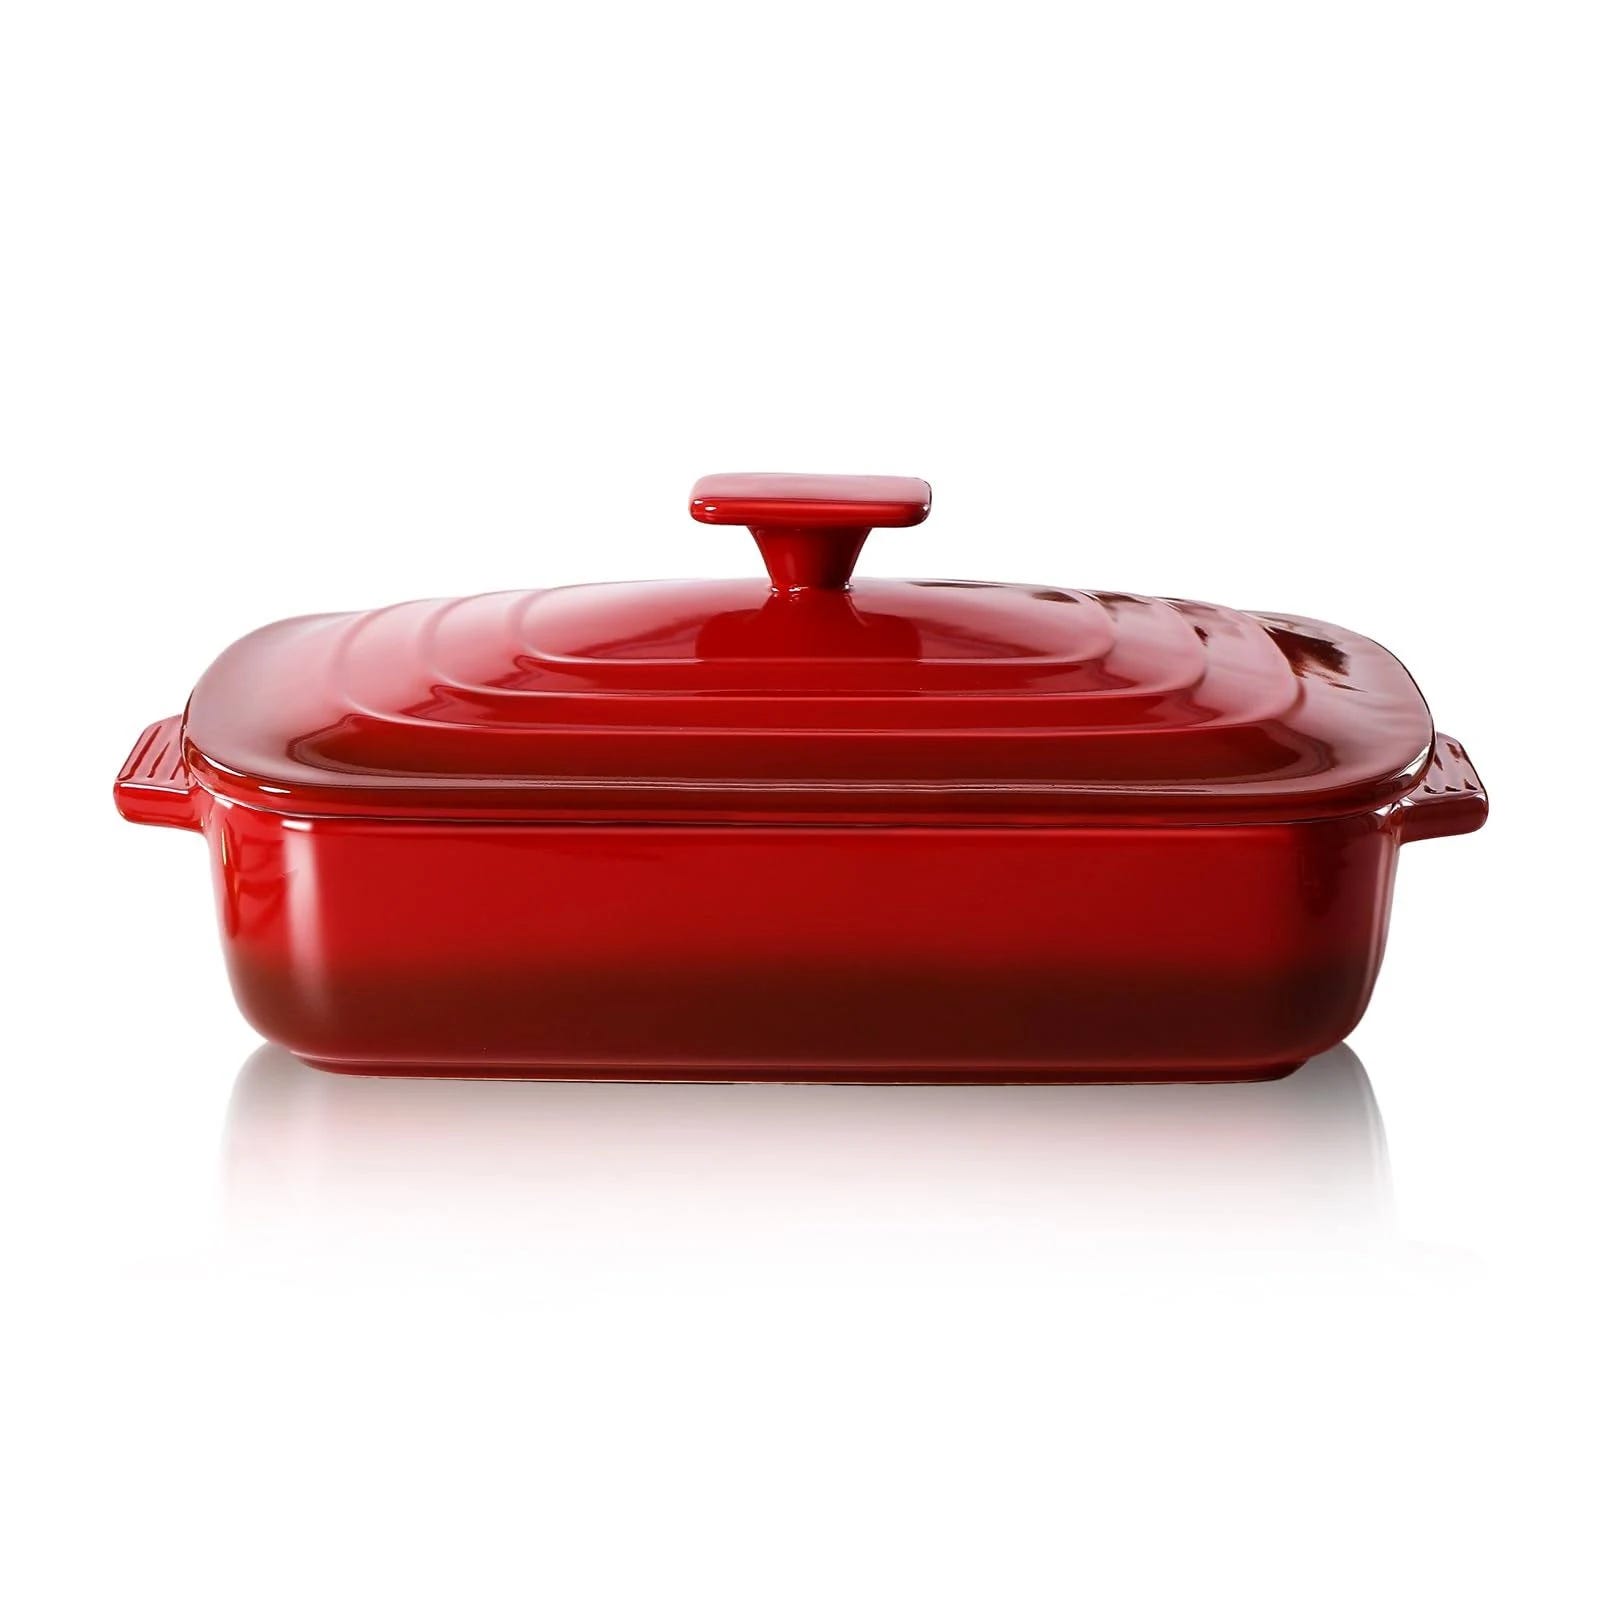 Lareina Large Ceramic Round Casserole Dish with Lid - Ideal for Baking Lasagna and Casseroles | Image